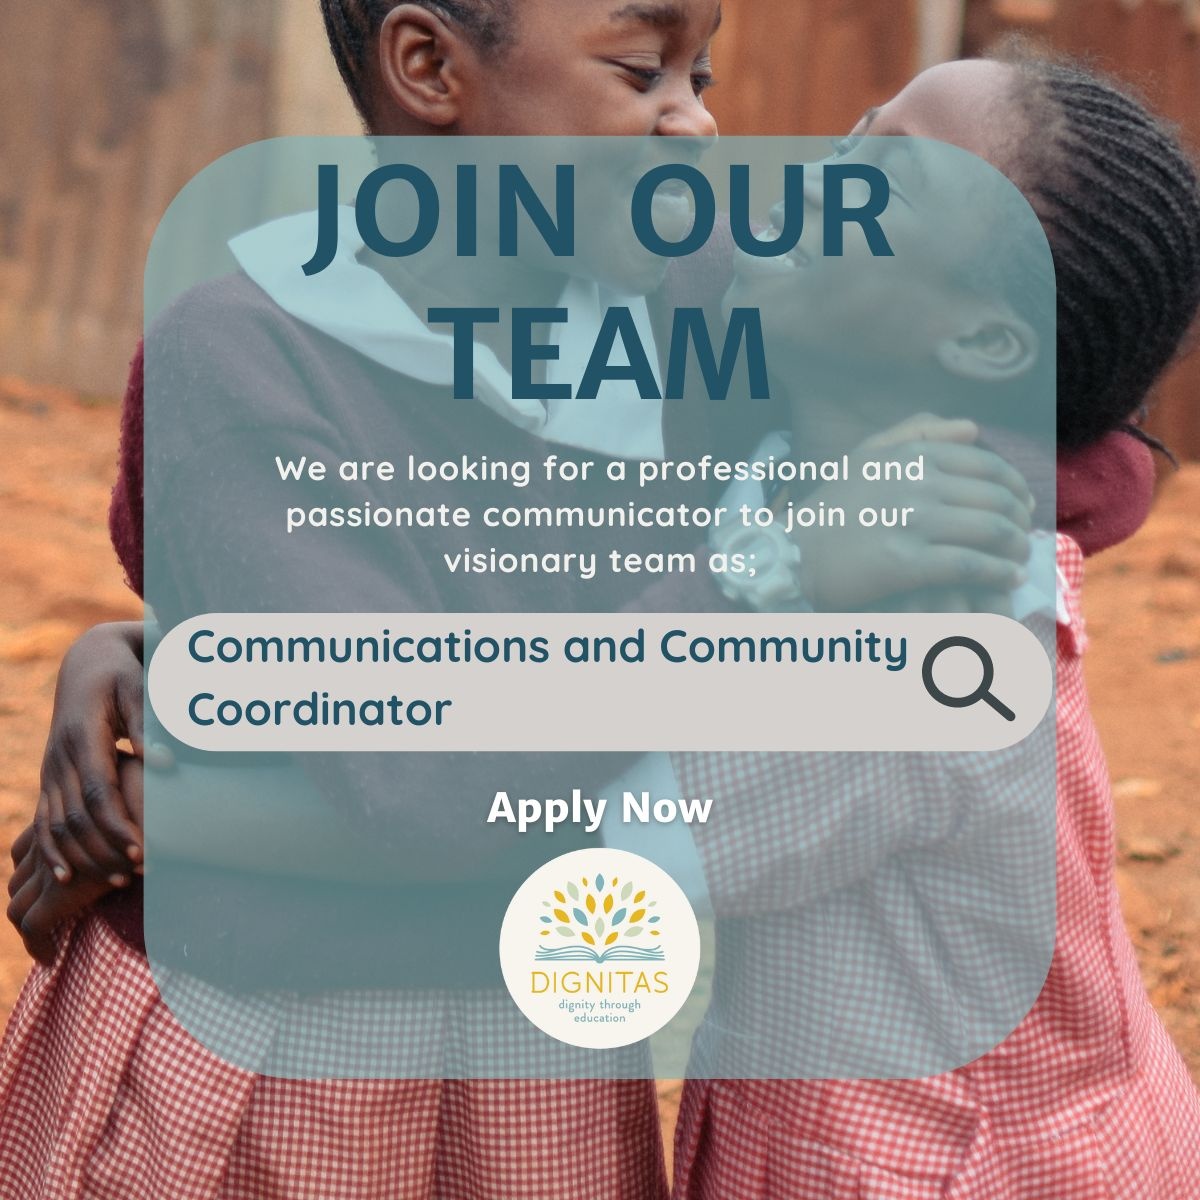 Join our team! We're on the lookout for a dynamic Communications and Community Coordinator to drive impact and engagement. Are you passionate about education and community building? Apply now and be part of our journey to create transformative impact! lght.ly/1m0hf2